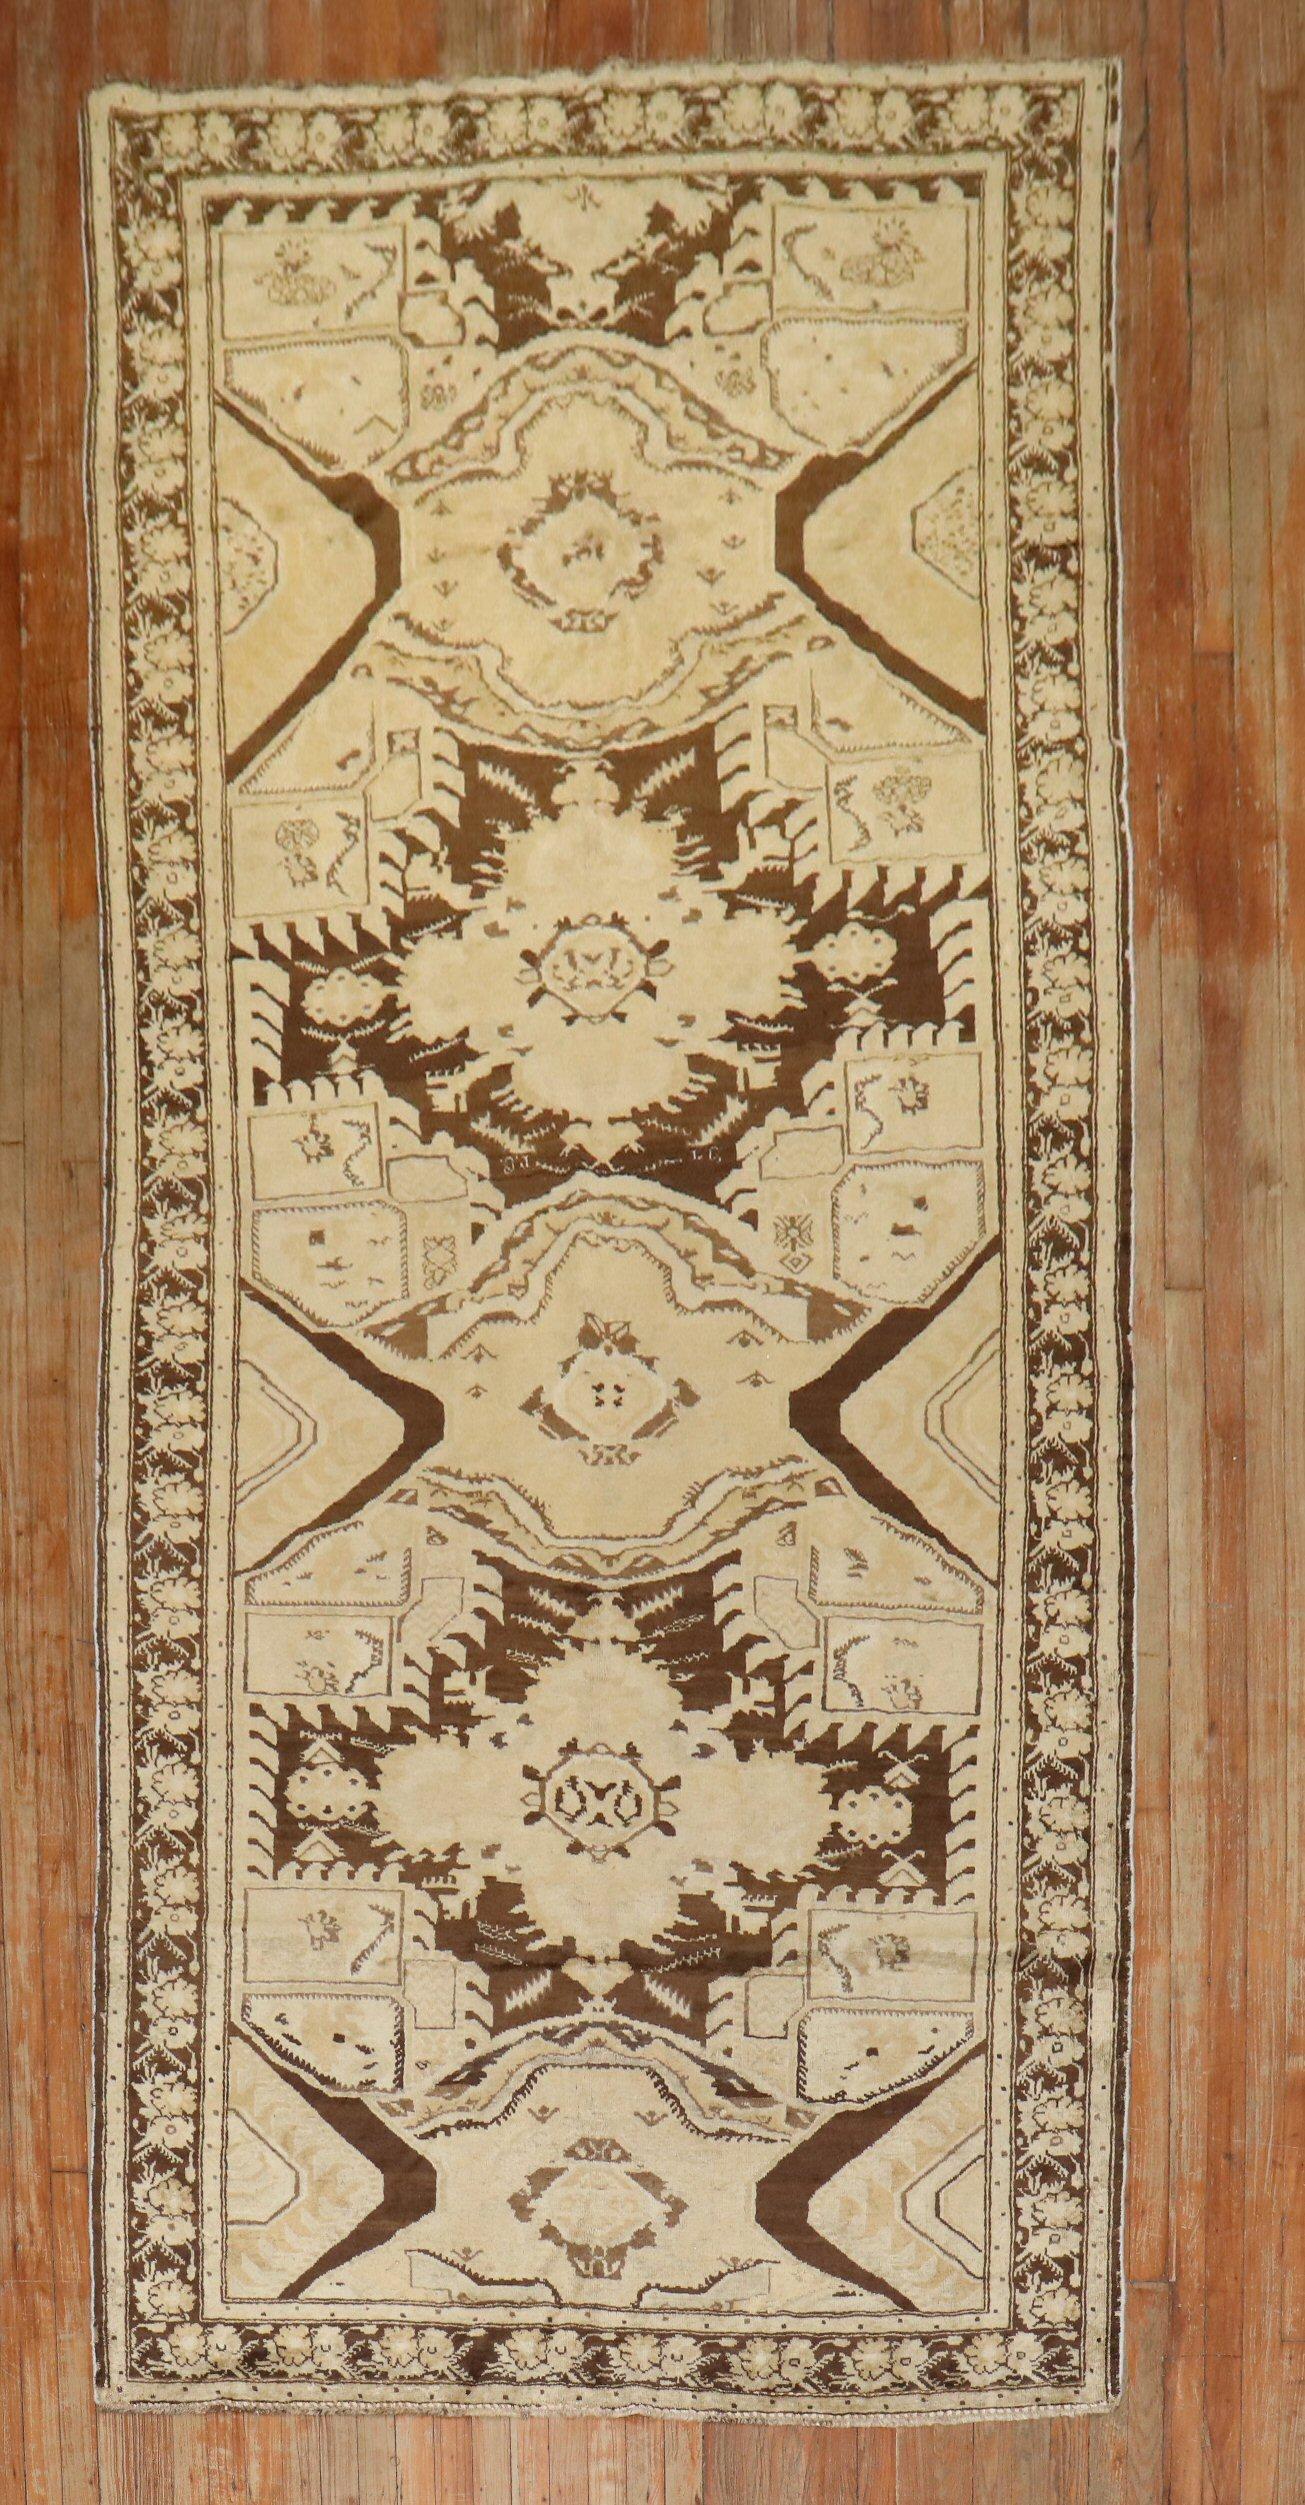 a gallery size neutral color Karabagh rug fromthe 2nd quarter of the 20th century

5'2'' x 12'5''